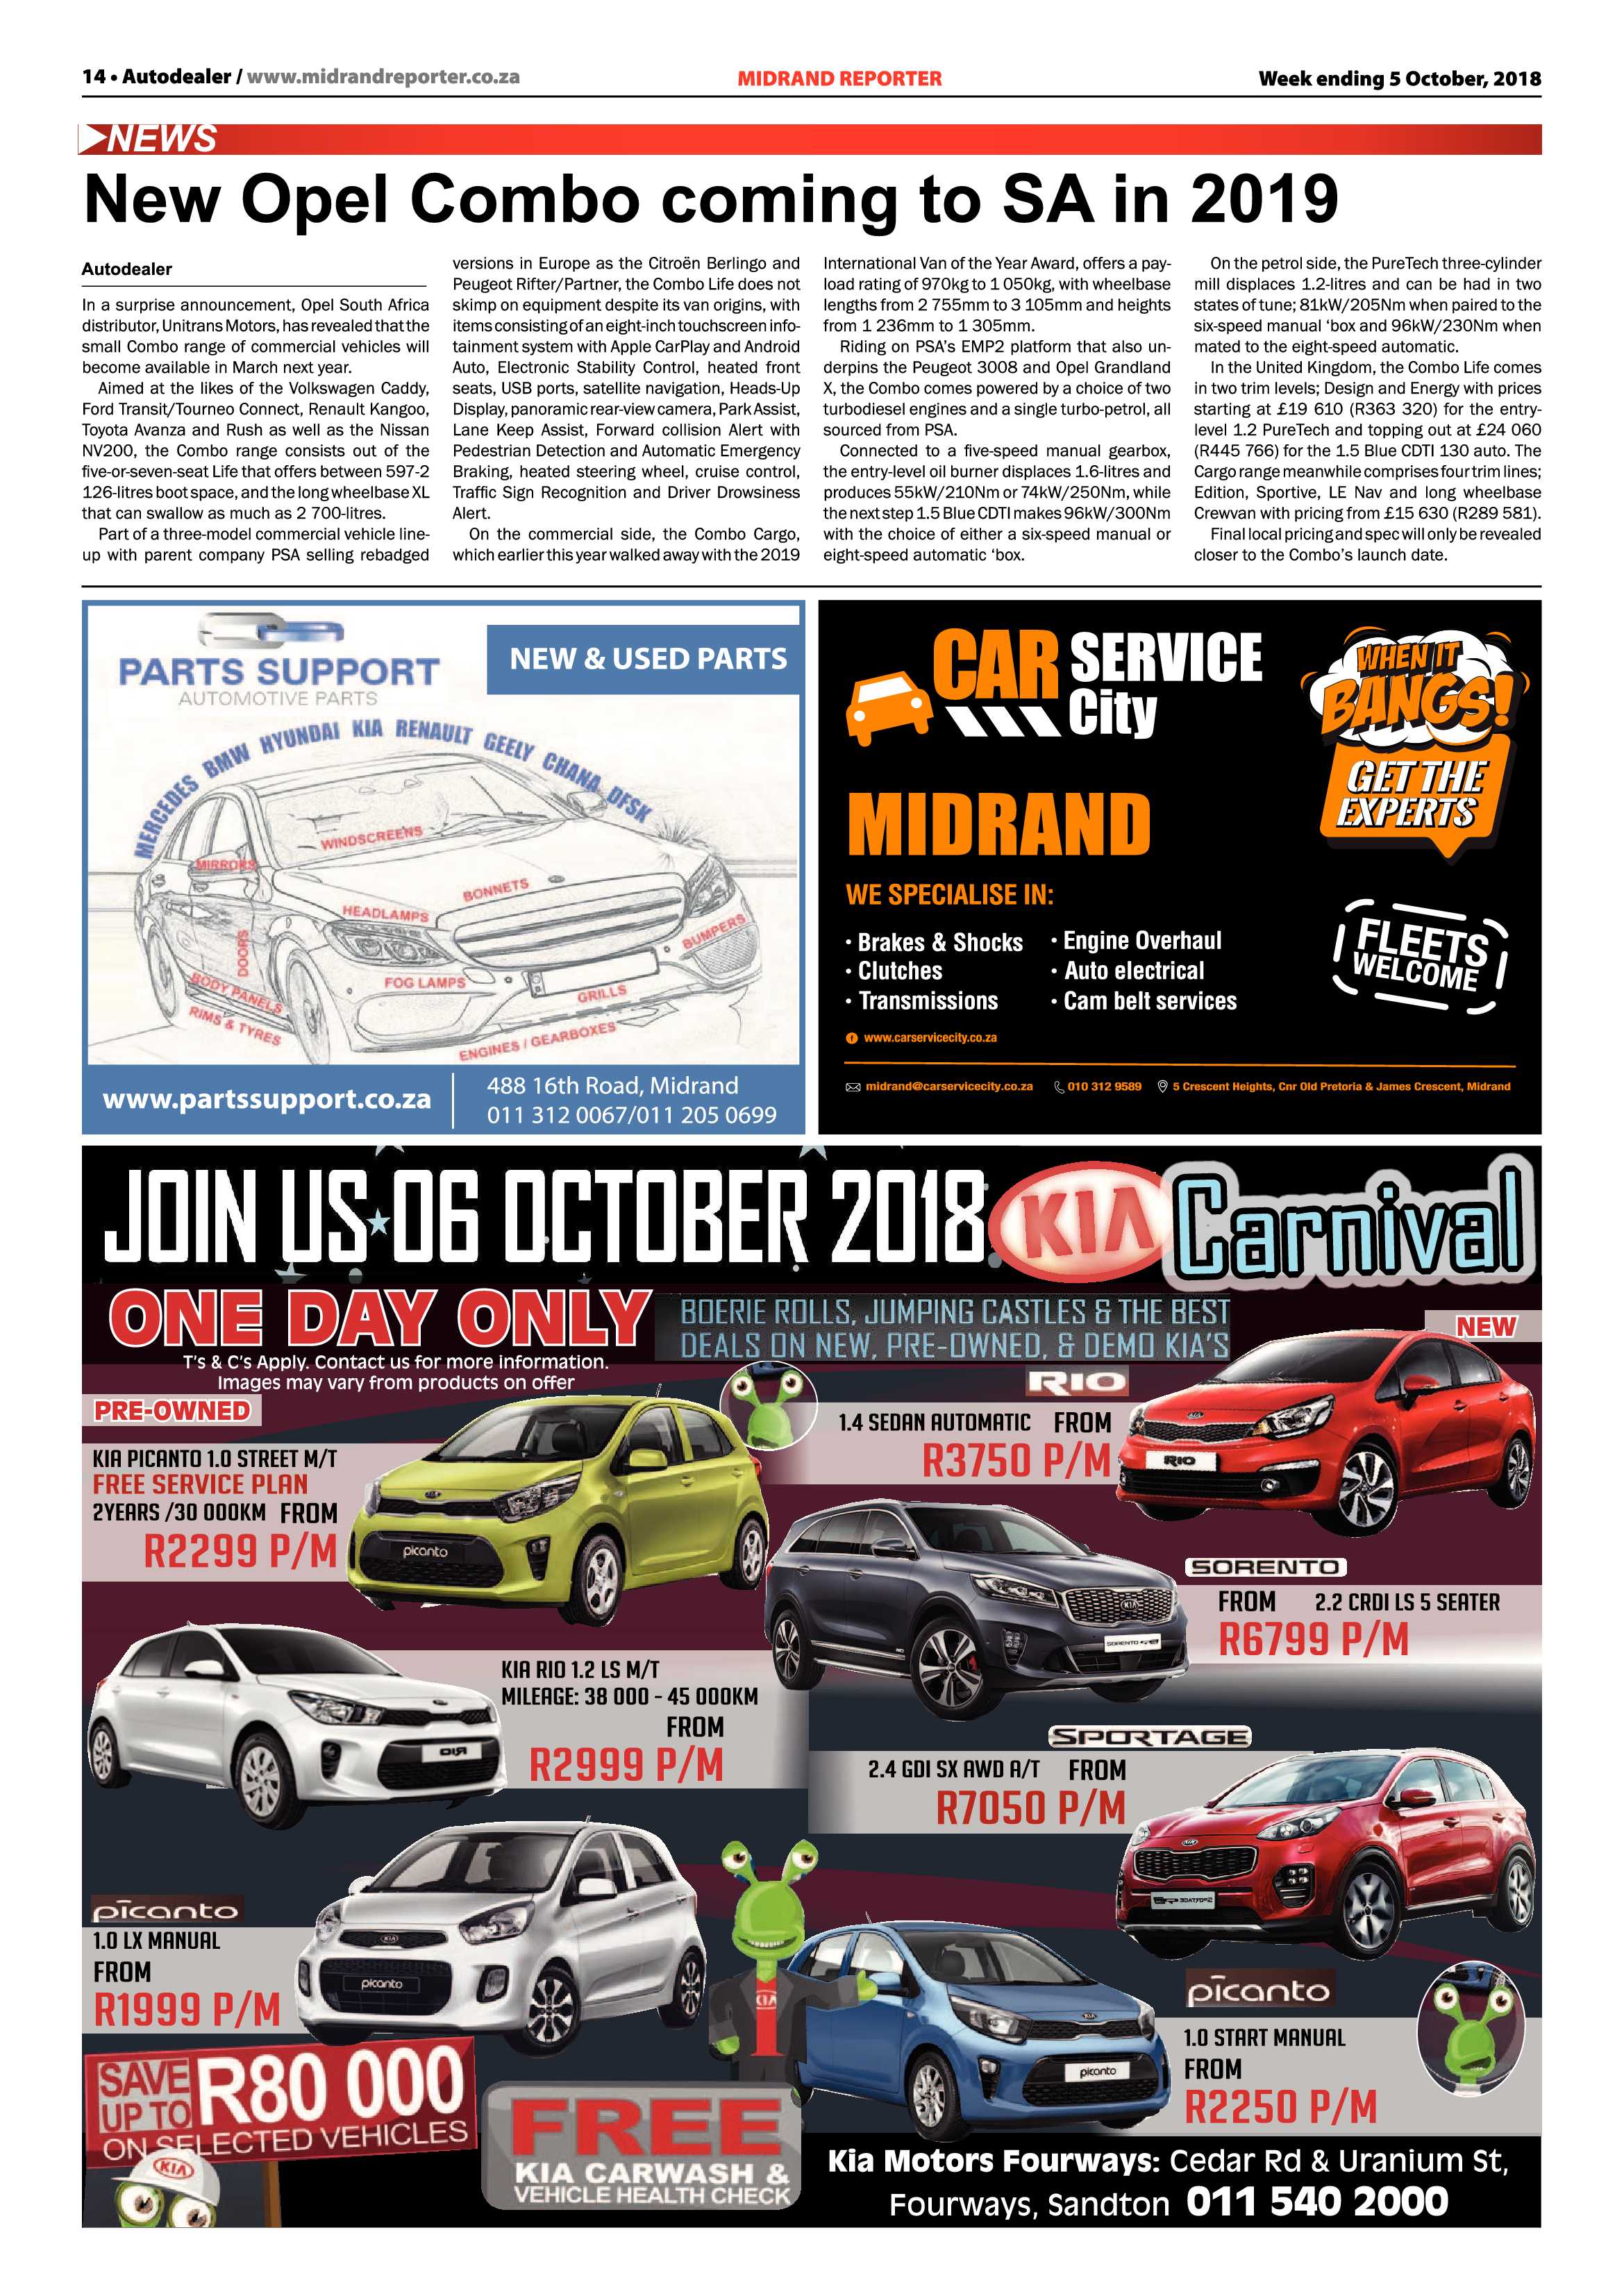 Midrand Reporter 5 October, 2018 page 14